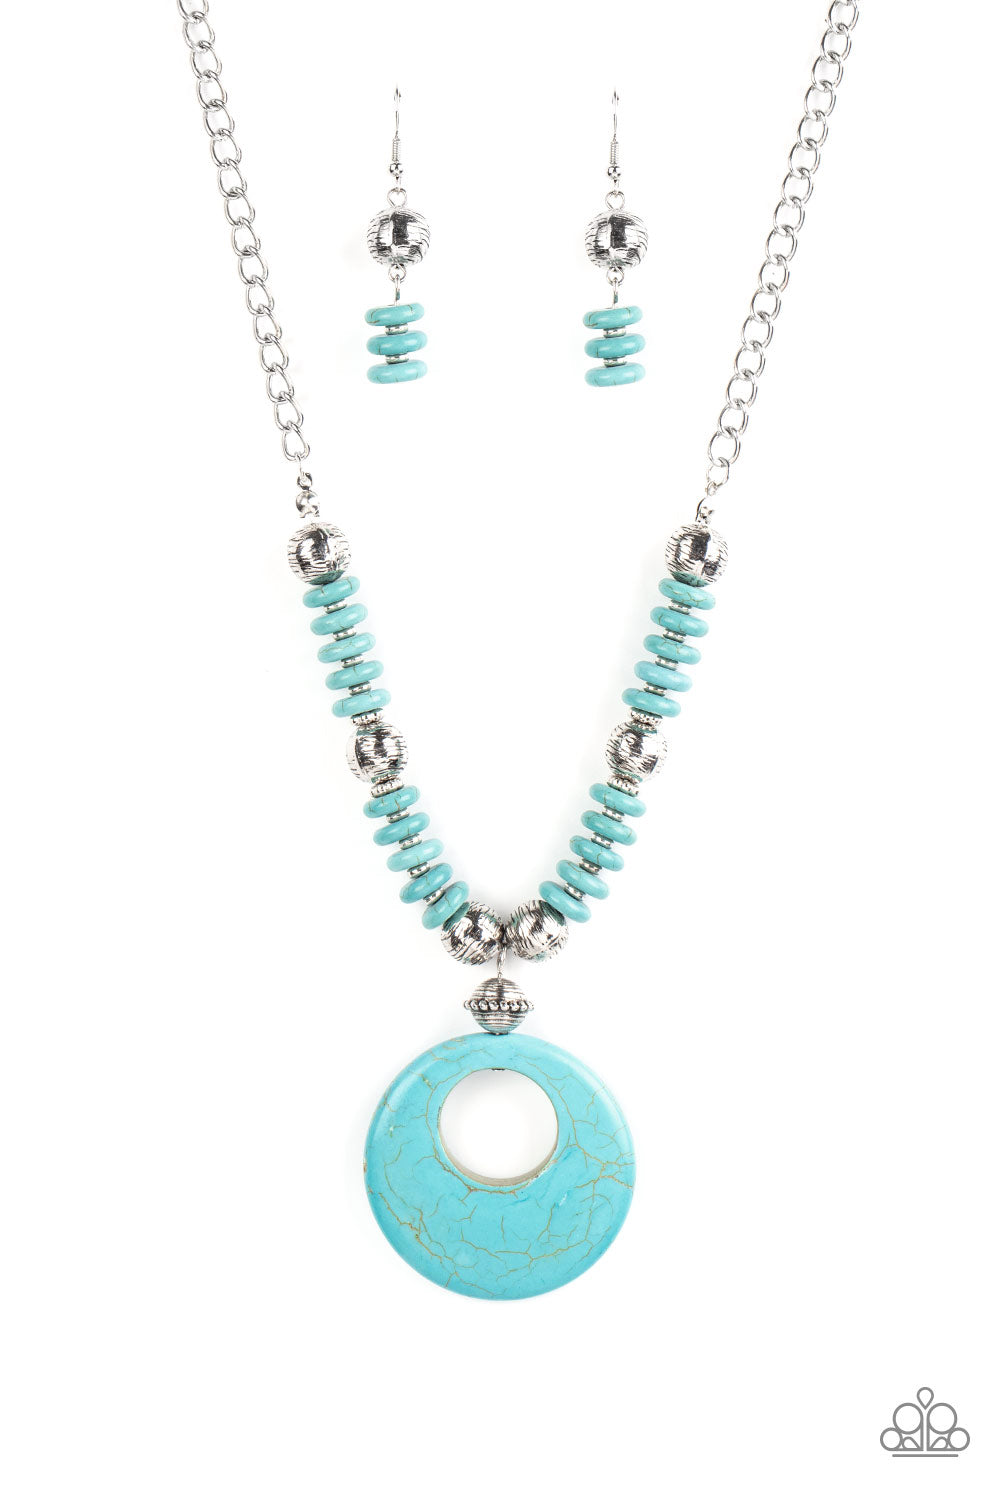 Paparazzi Jewelry Famous And Fabulous - Blue Iridescent Necklace Bling –  Bling by JessieK